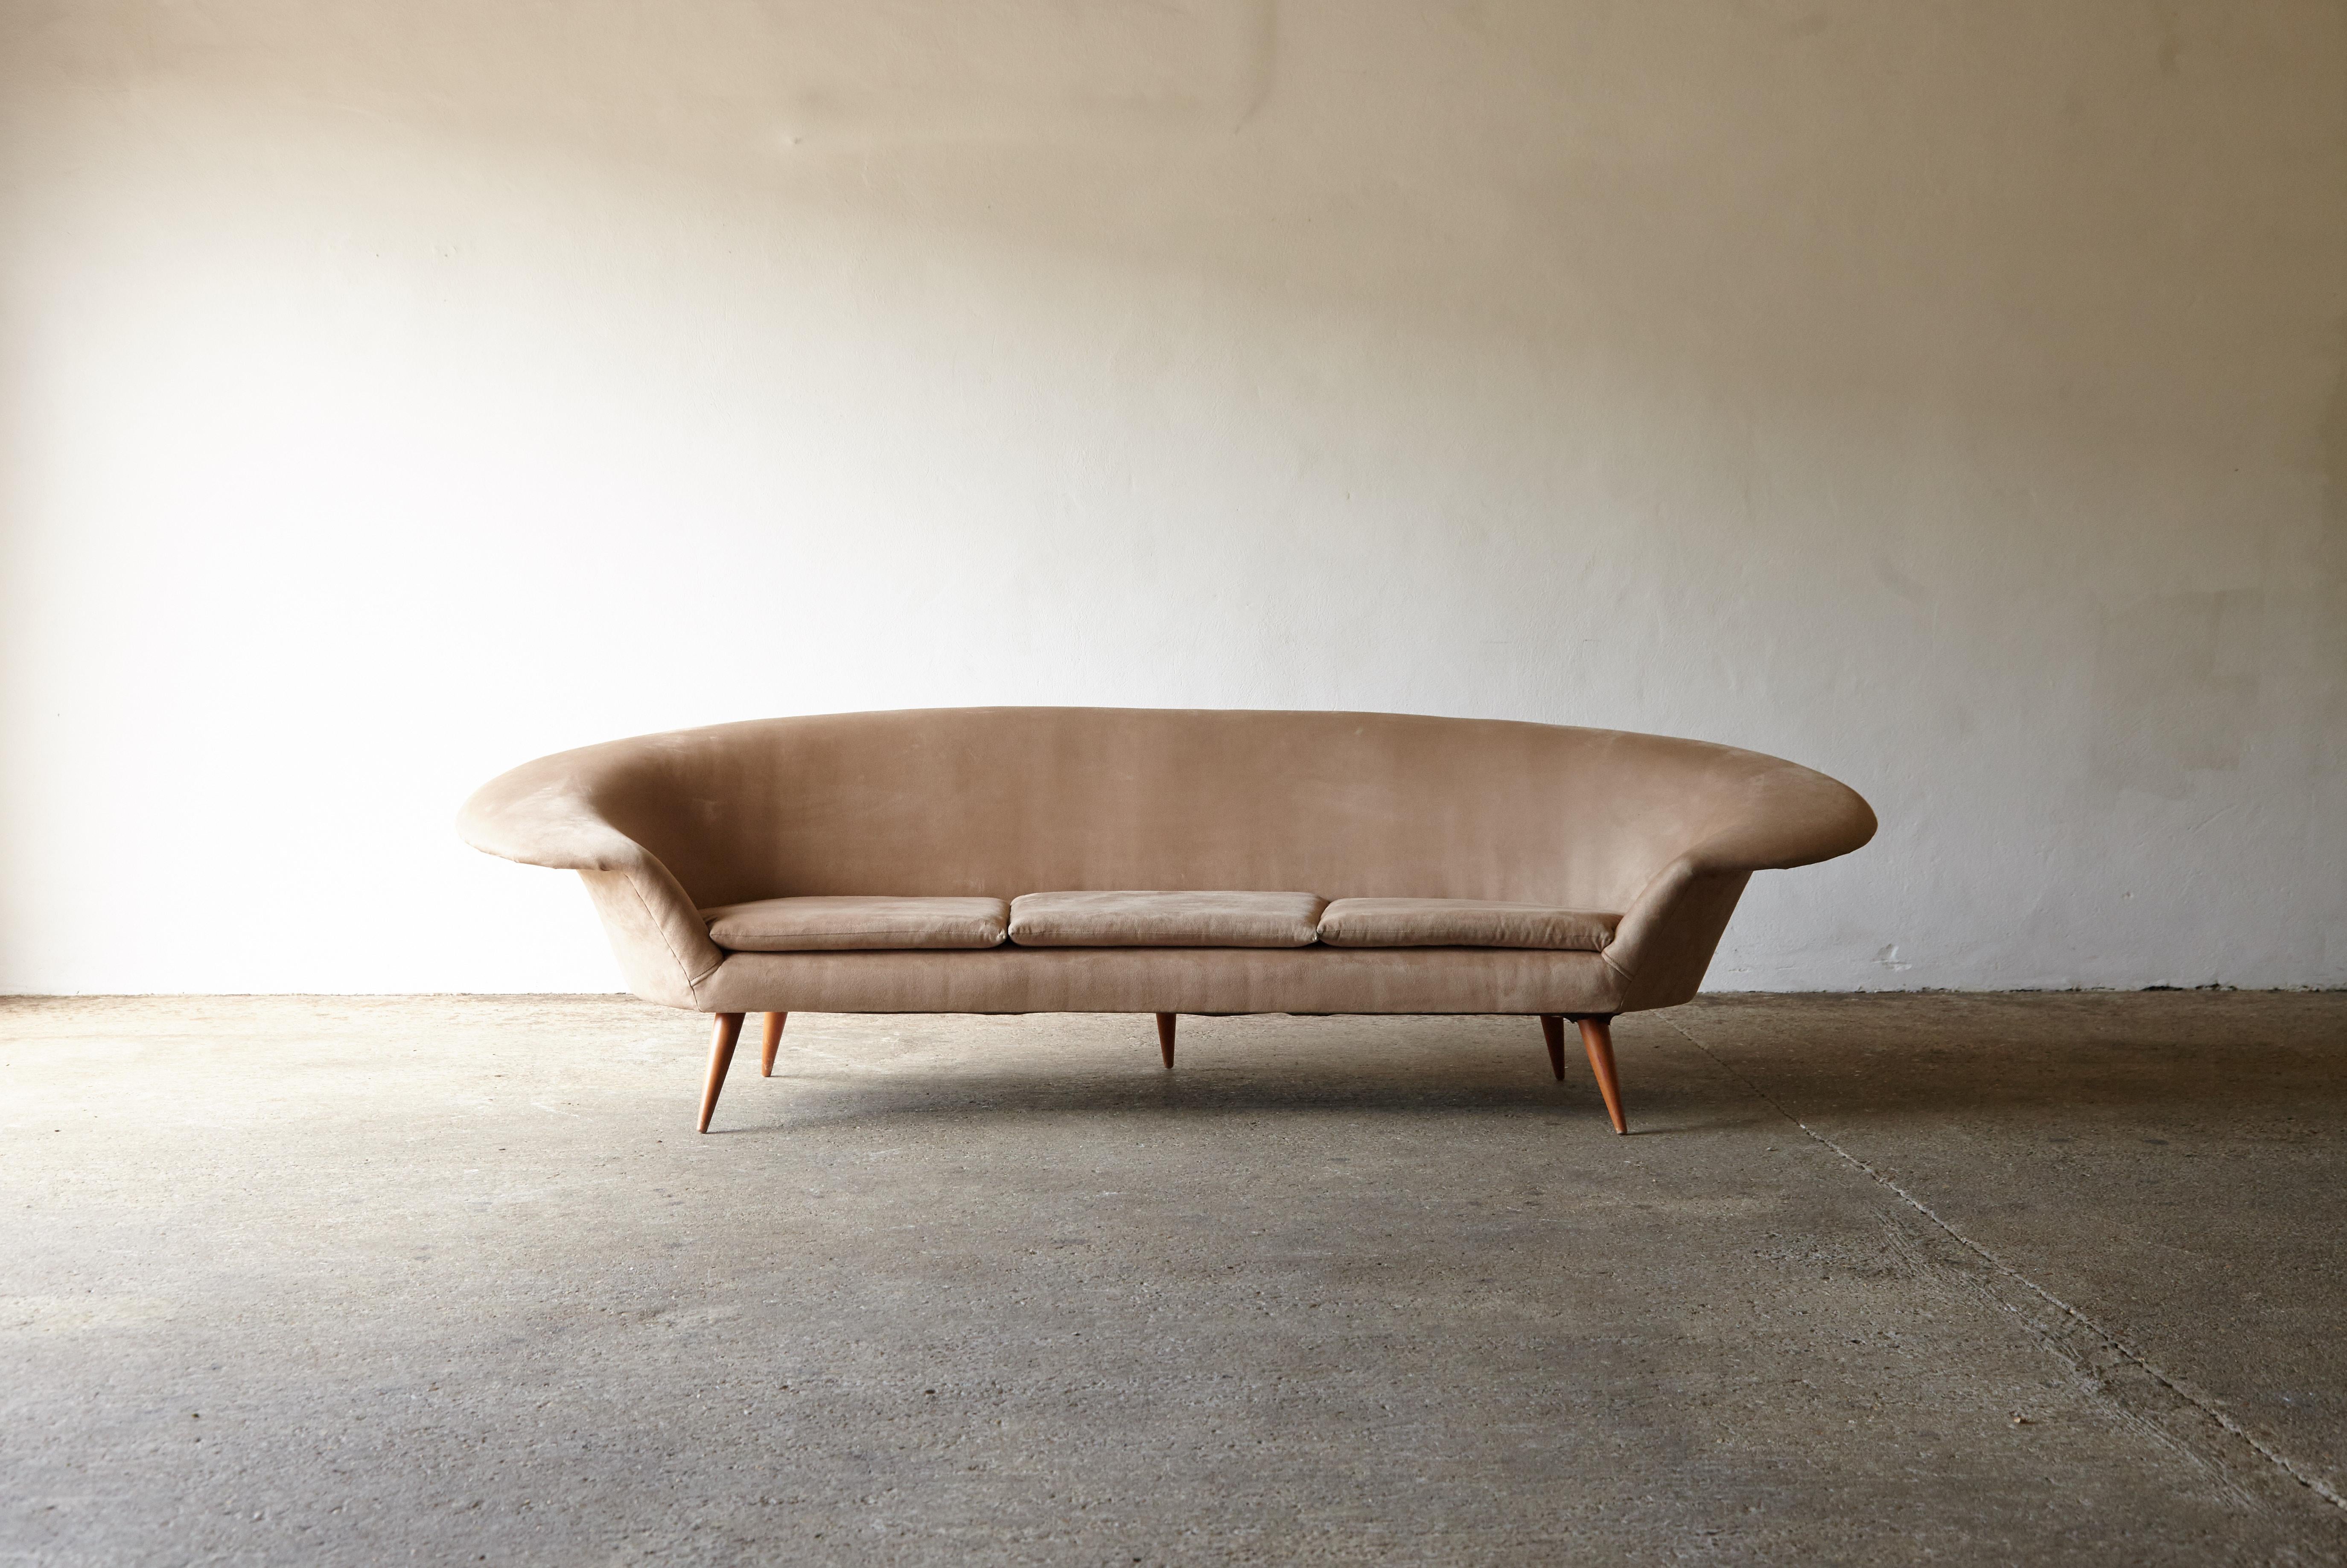 Rare curved Swedish three-seat sofa attributed to Kerstin Horlin Holmqvist ‘Holmquist’ sofa, 1950s. Flared arms and back, with three removable seat cushions and two round throw pillows. Currently covered in beige fabric in good vintage condition